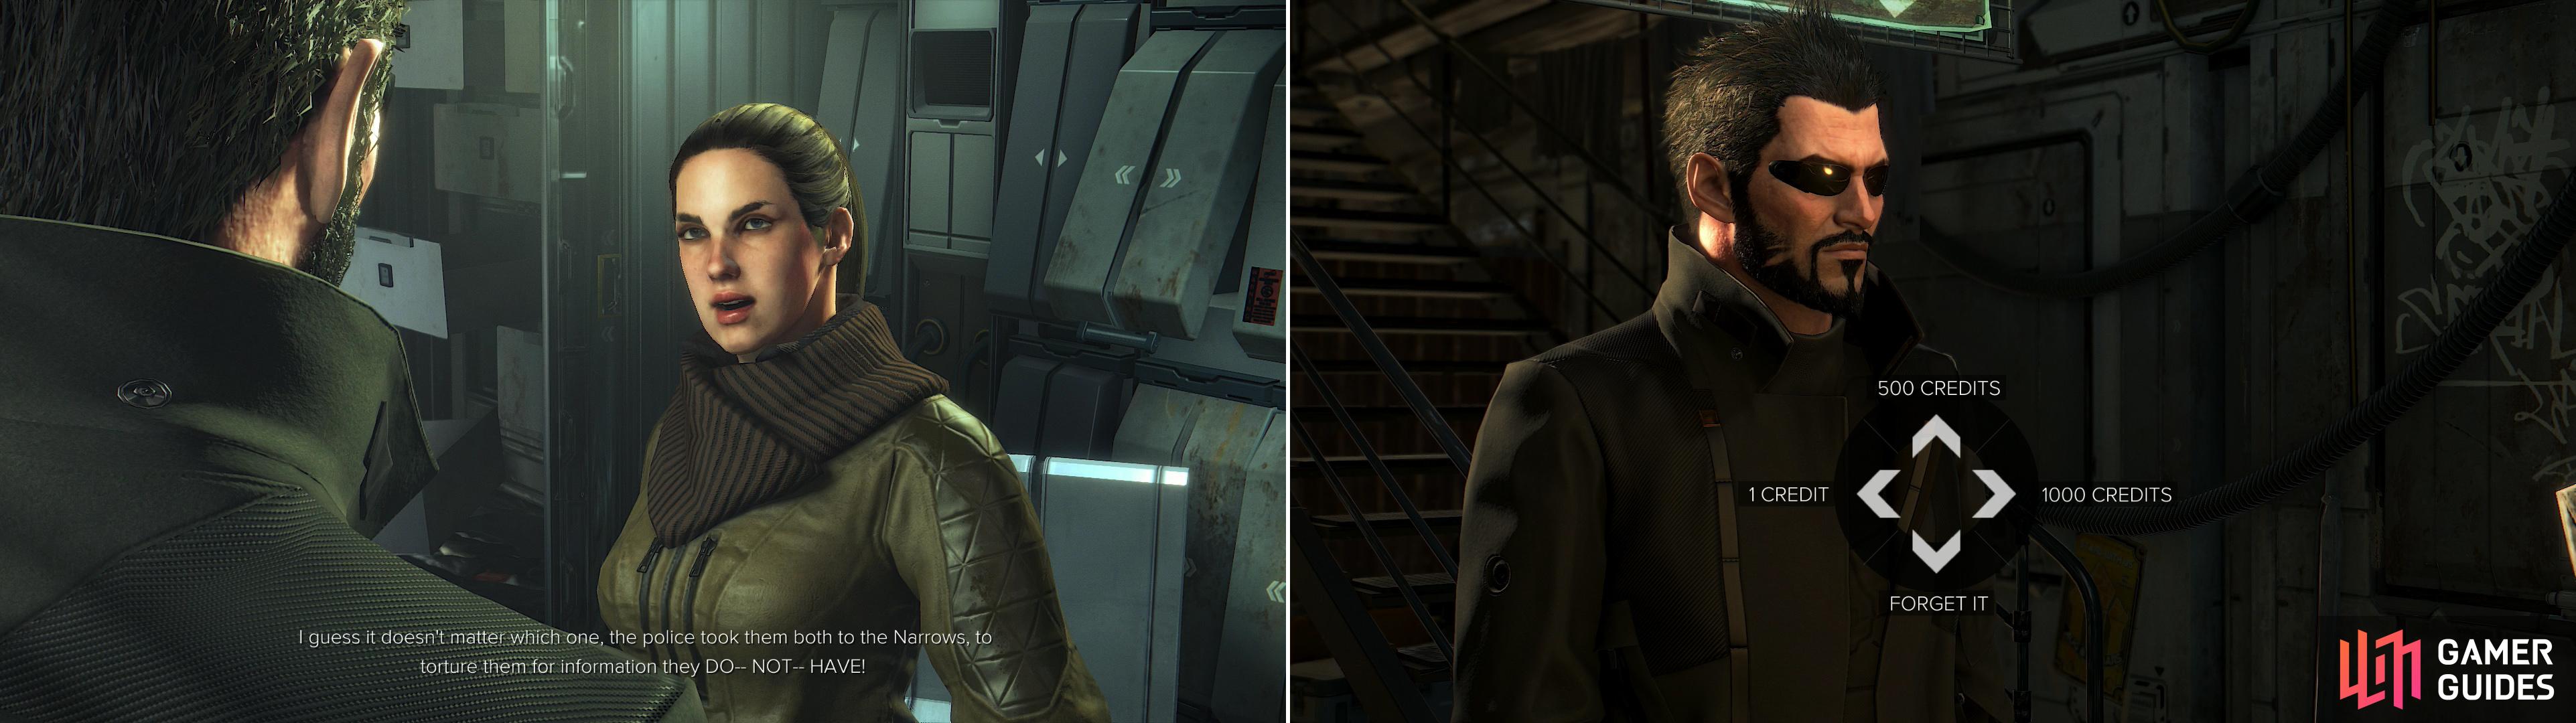 Visit the contact's house to learn a bit of bad news (left). Bribe the police officer guarding the prison to get to speak to Tibor Sokol (right).